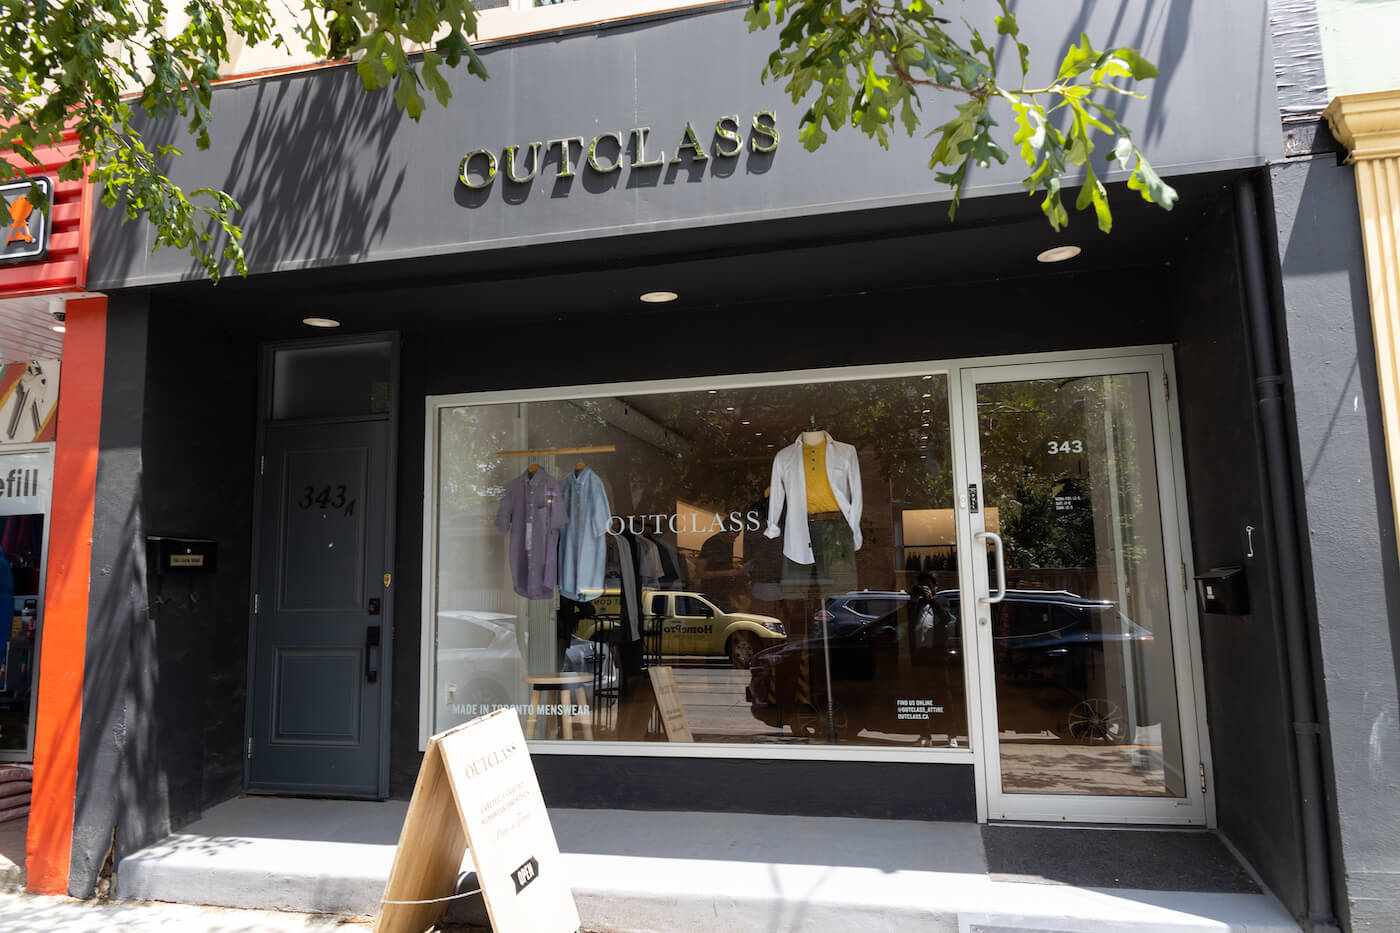 Things to do in Roncesvalles – Outclass clothing